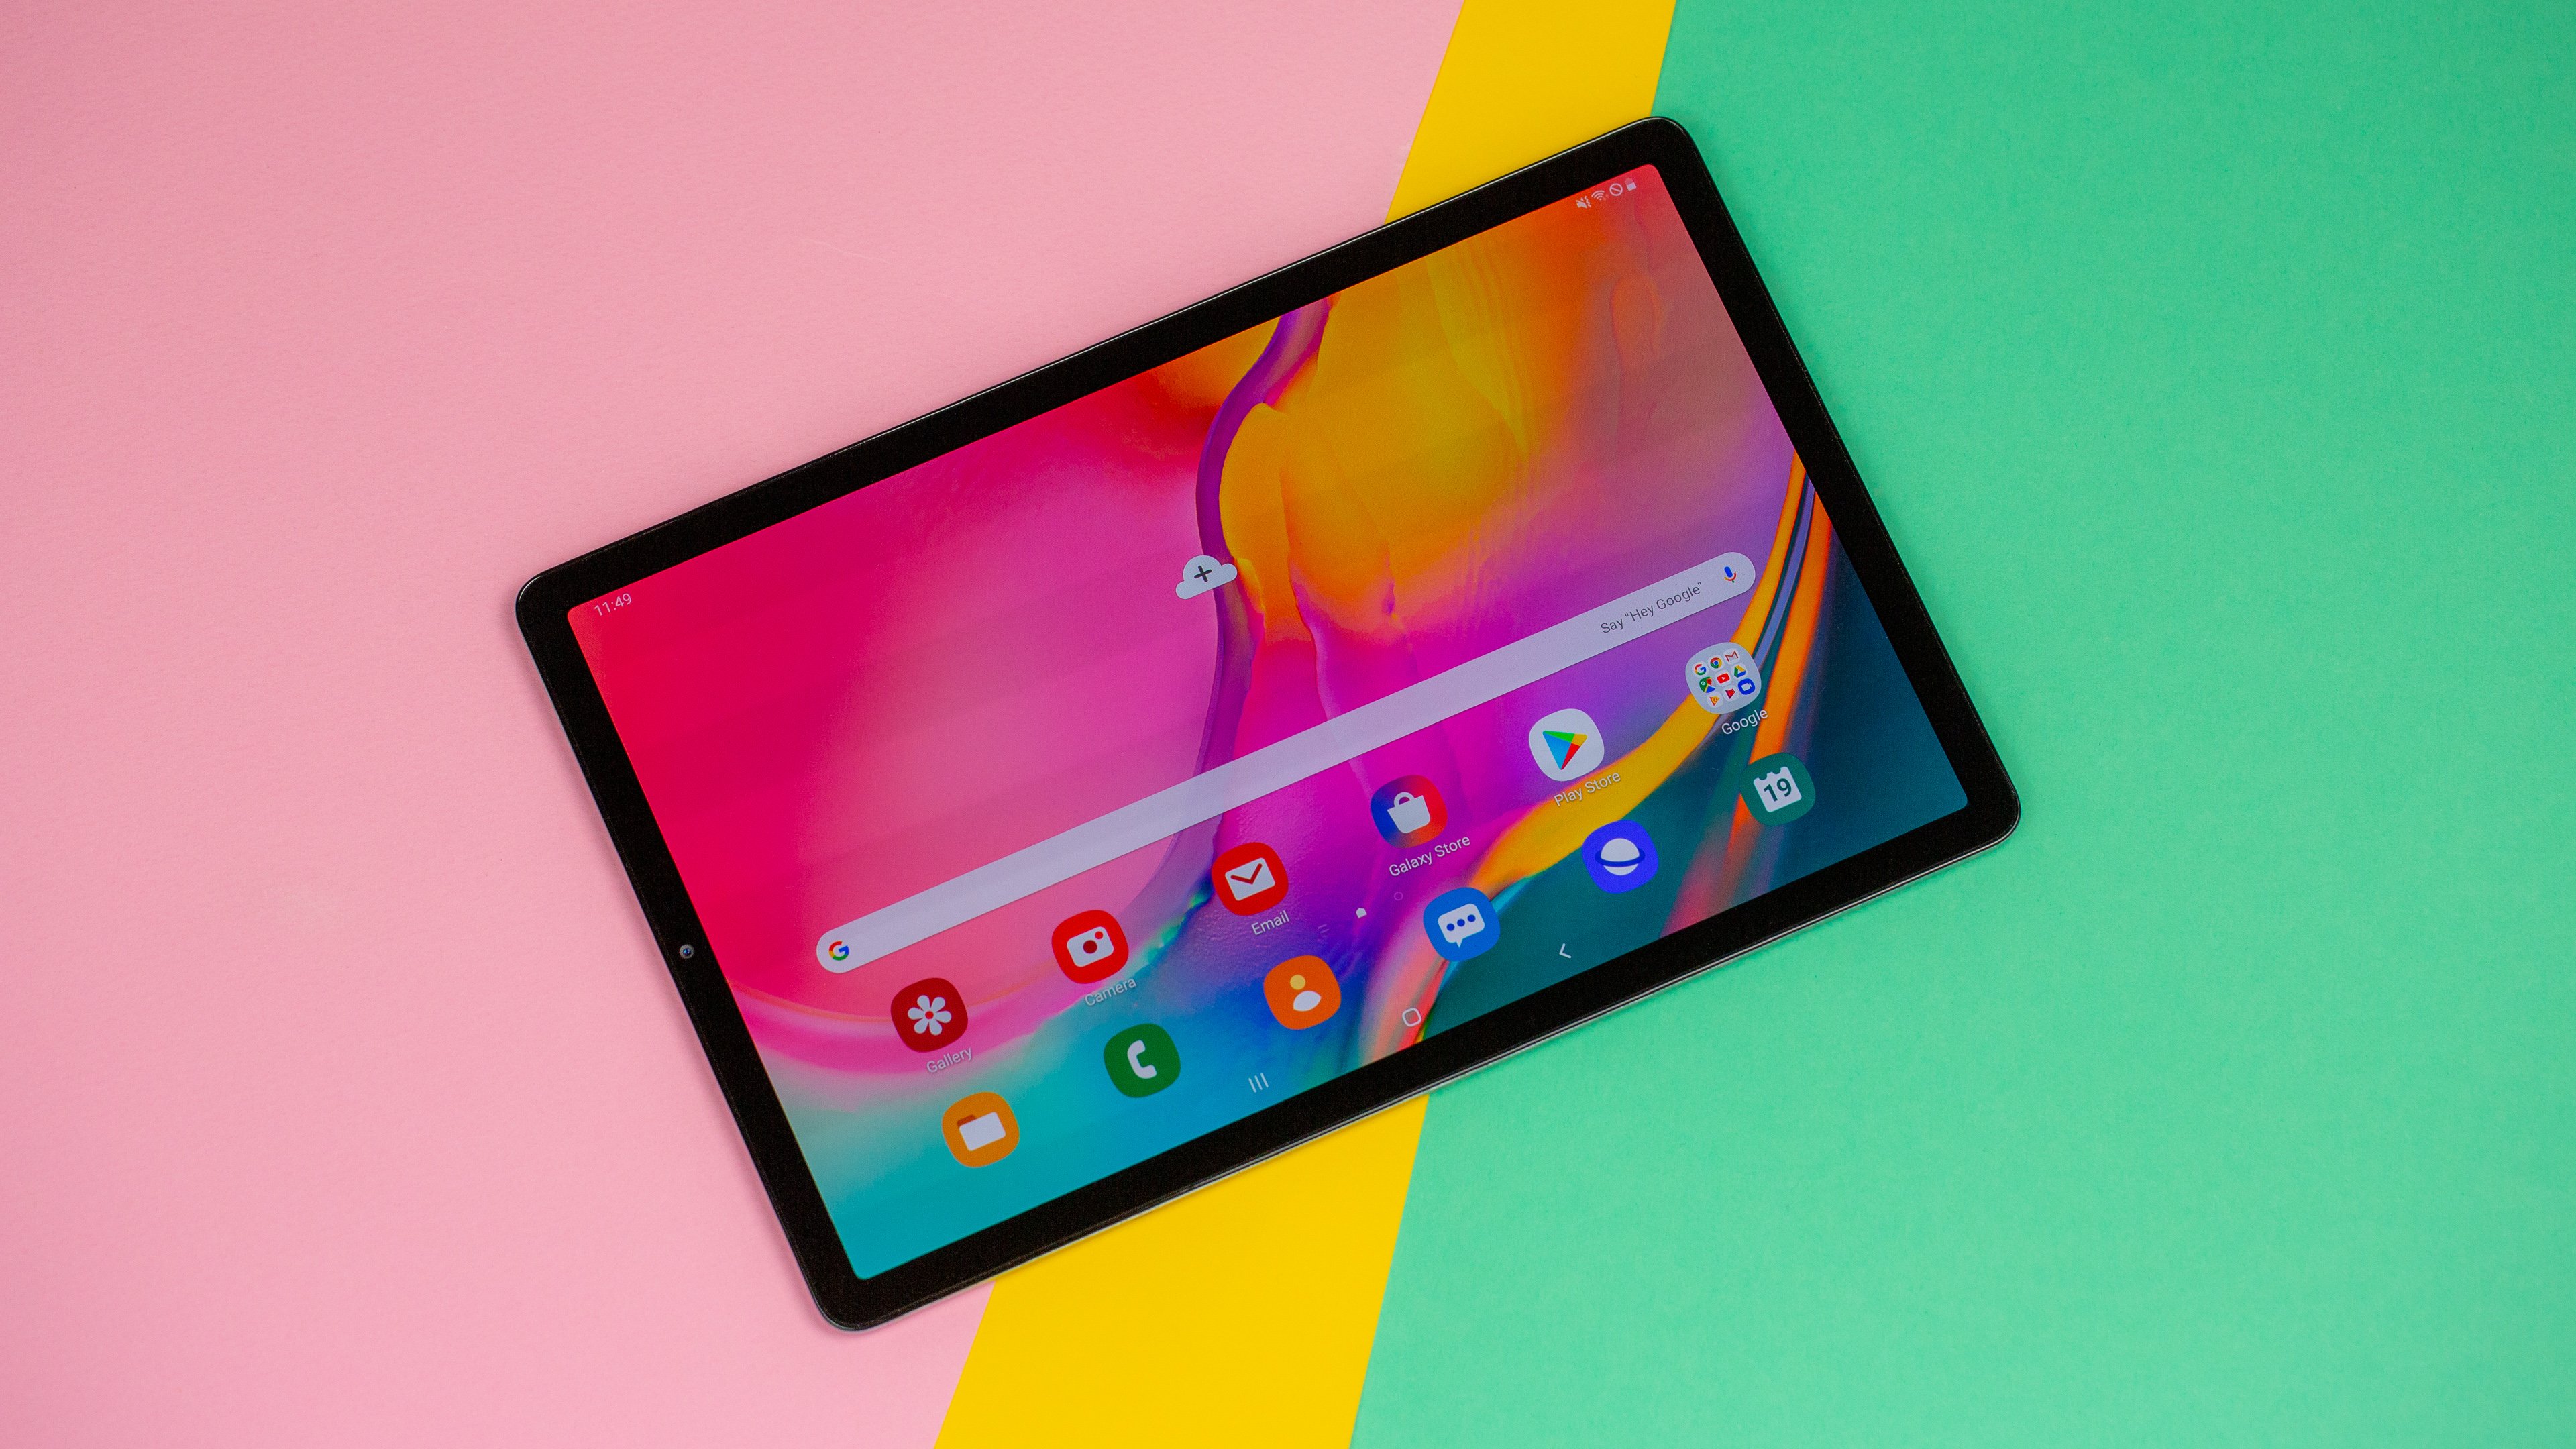 Samsung Galaxy Tab S5e review: pretty, light and the price is right